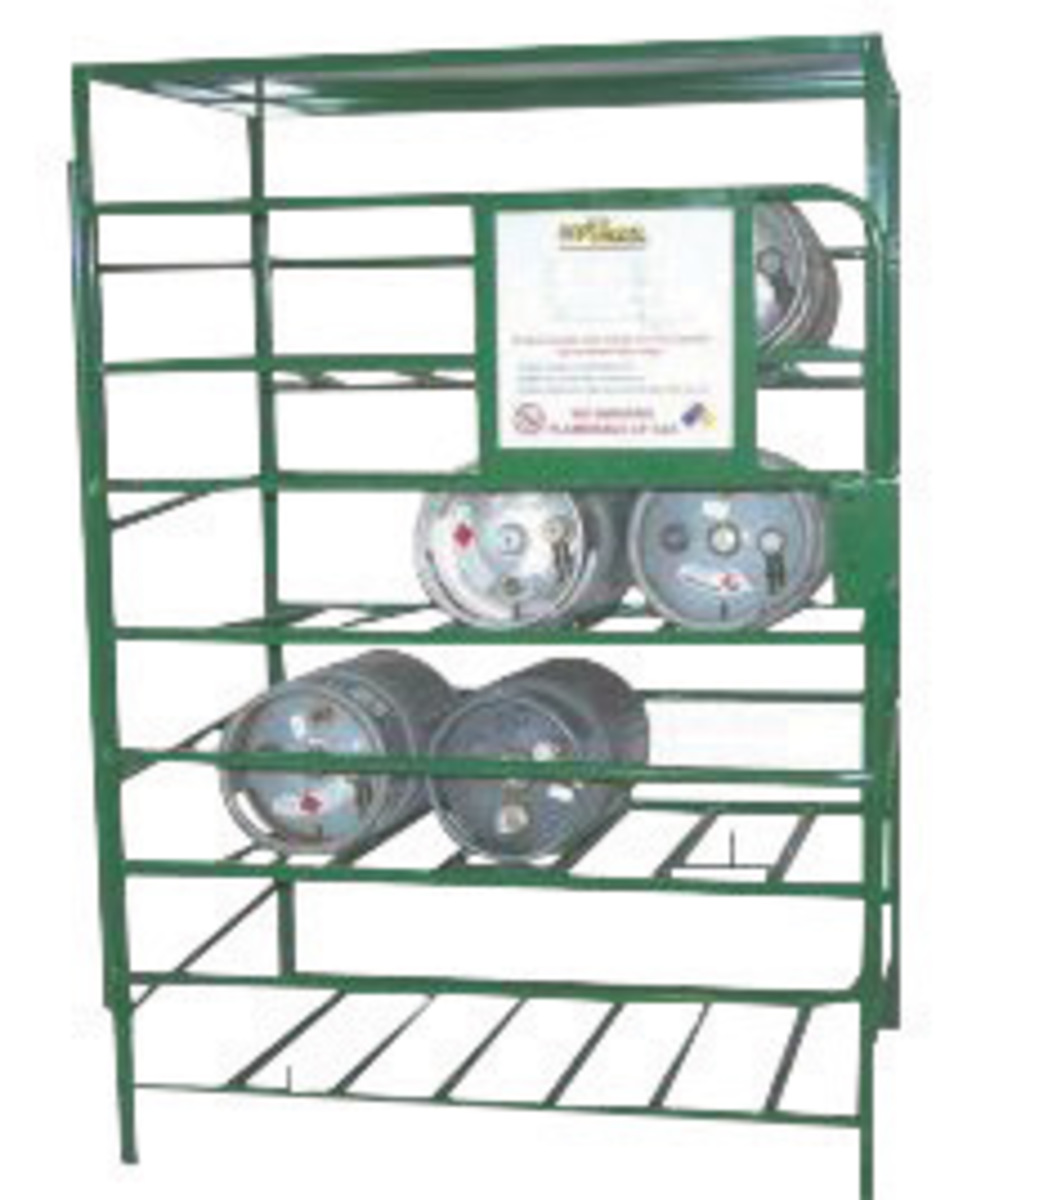 Airgas - STCSTS-9 - Saf-T-Cart Steel 9 Cylinder Cage